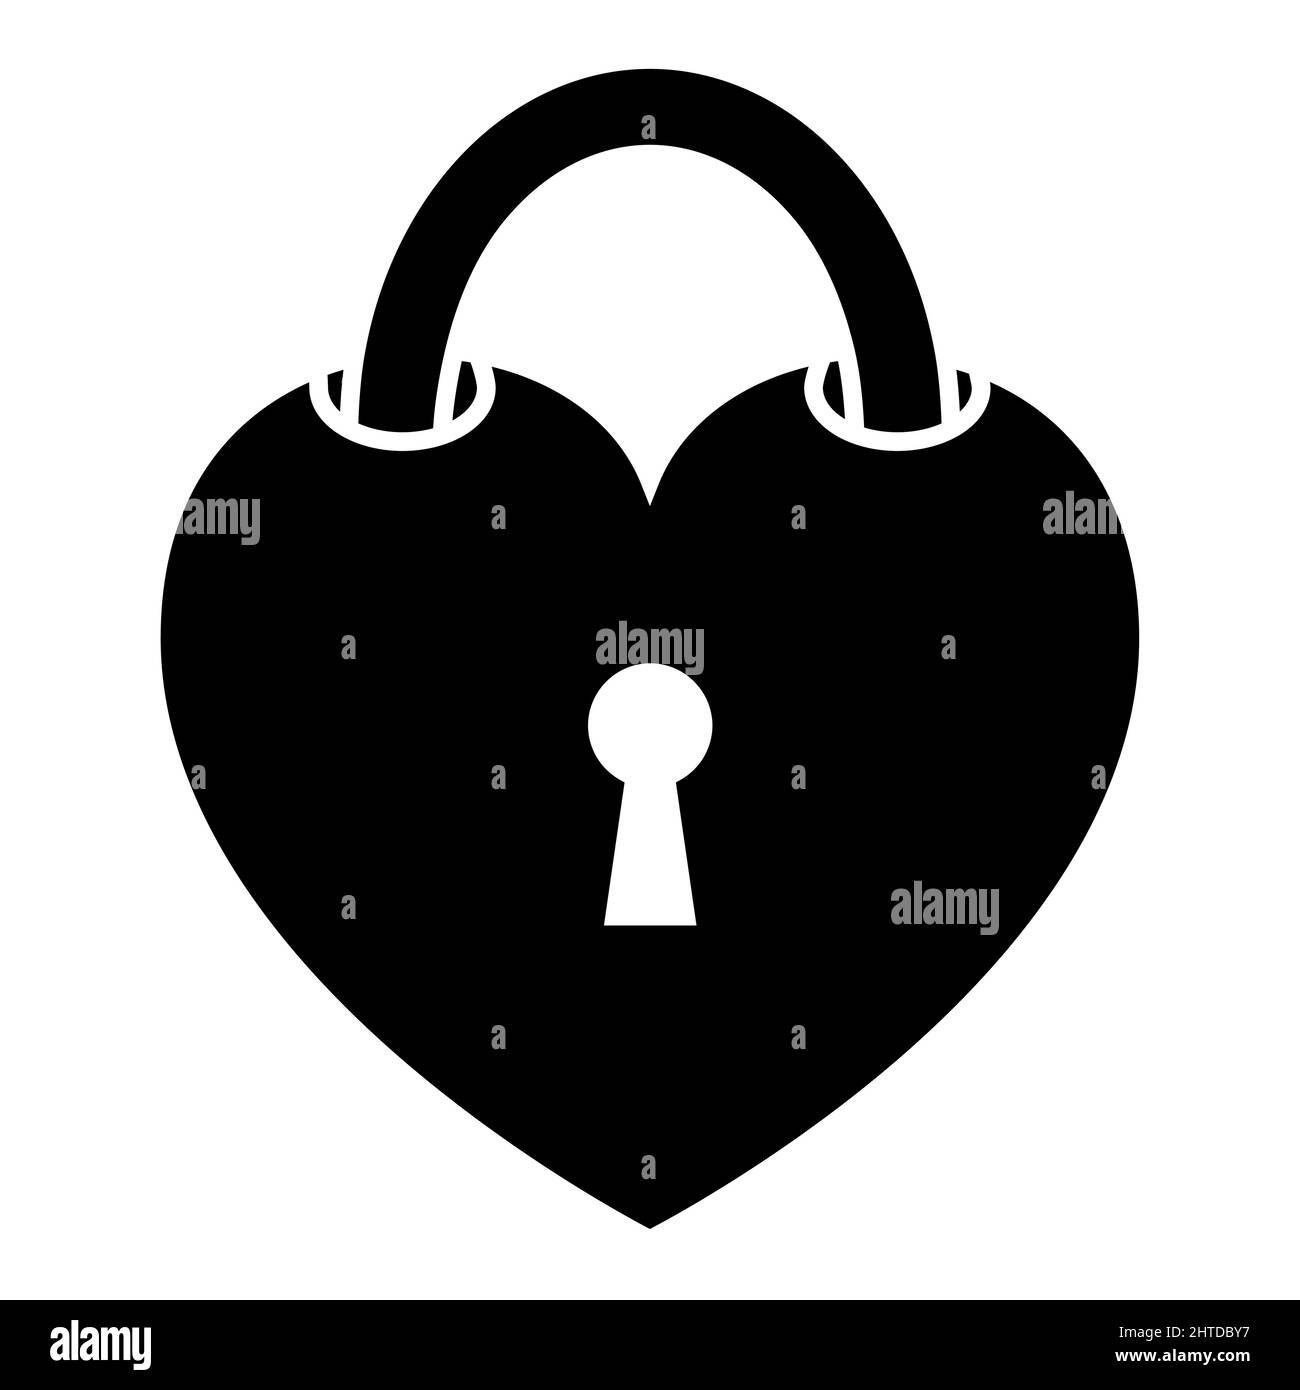 Heart shape lock icon. vector silhouette illustration isolated on white background Stock Vector